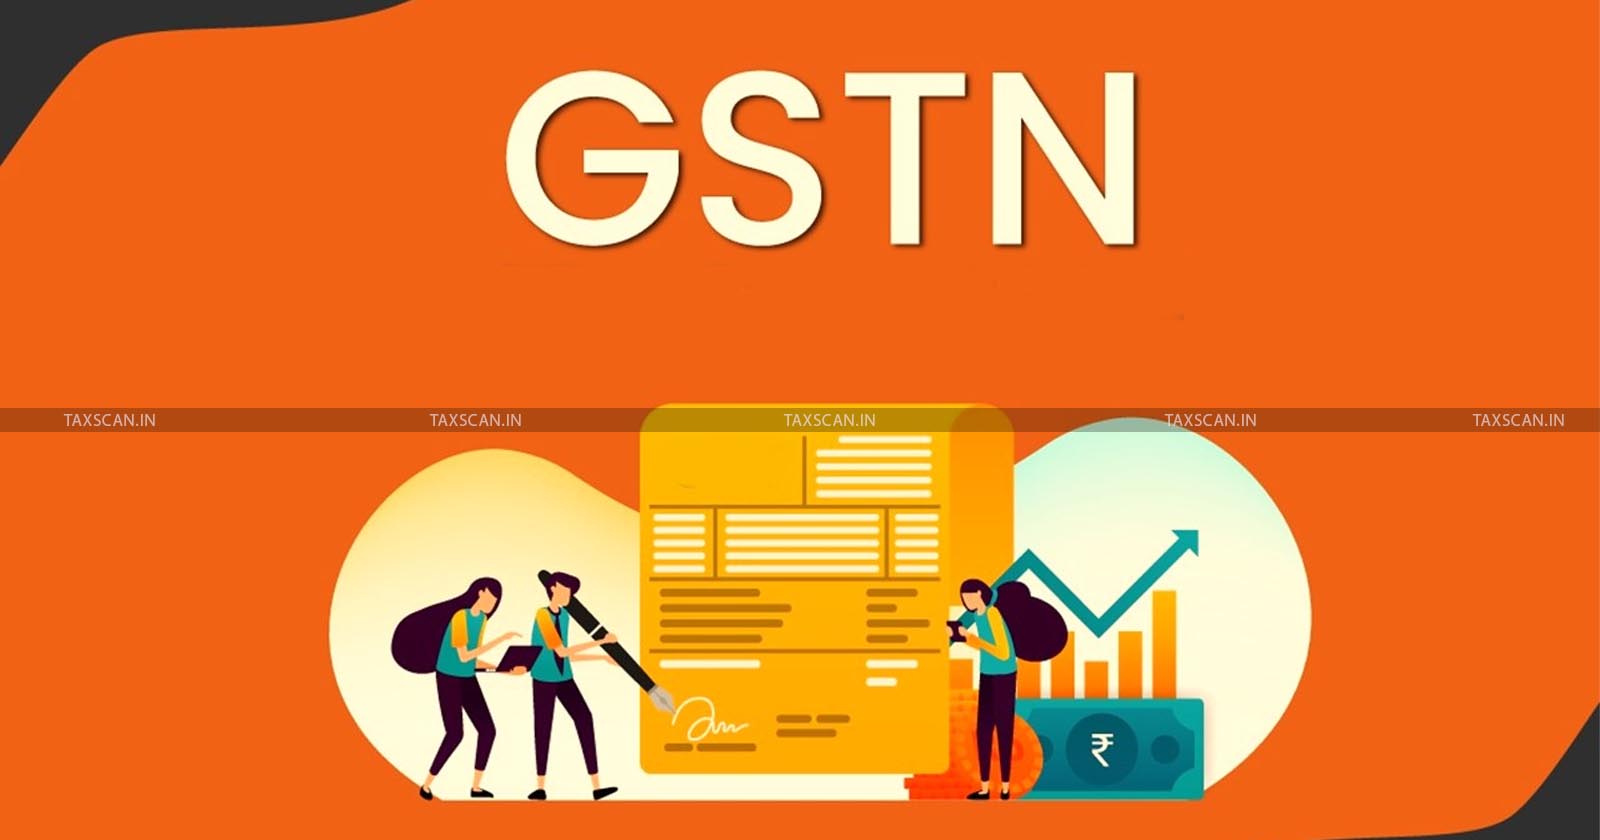 GSTN - gst - Newly Registered GTAs - Goods and Services Tax Network - Goods Transport Agencies - TAXSCAN